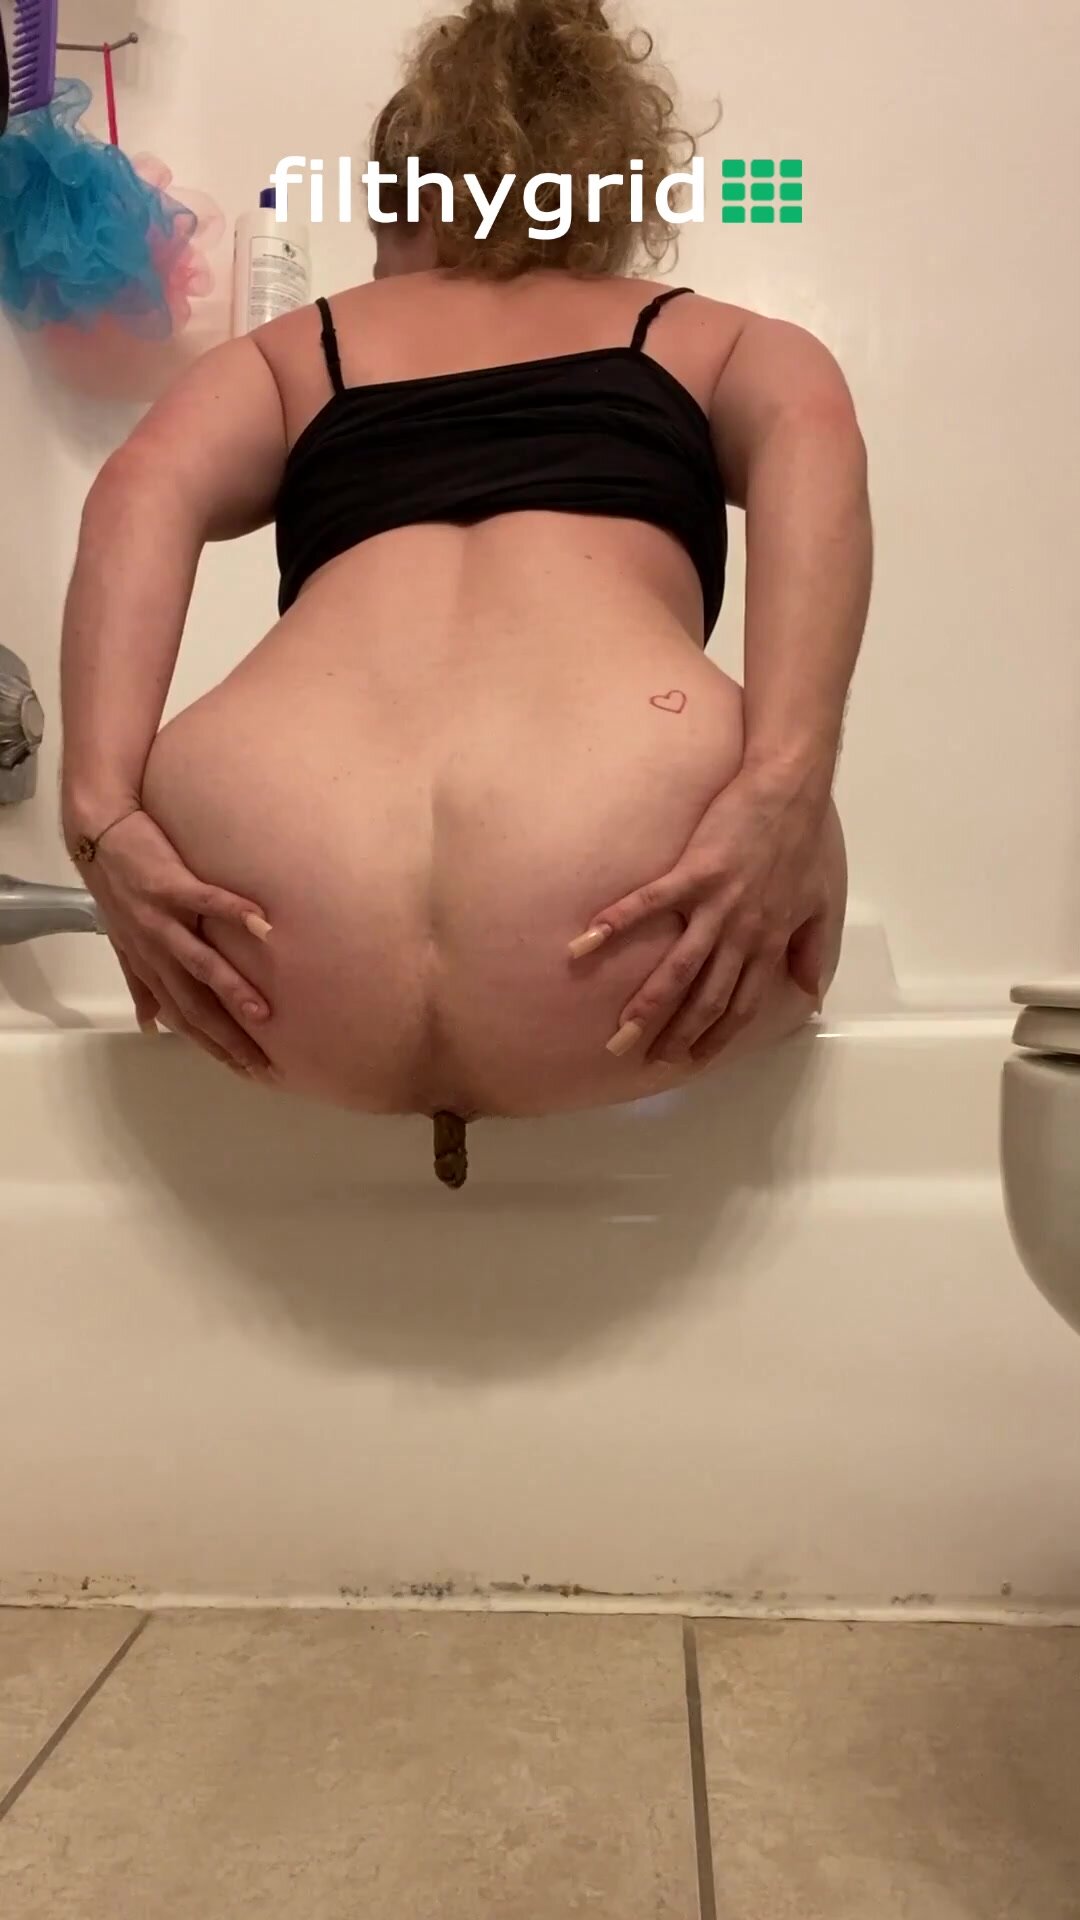 Taking A Shit Off The Side Of The Tub